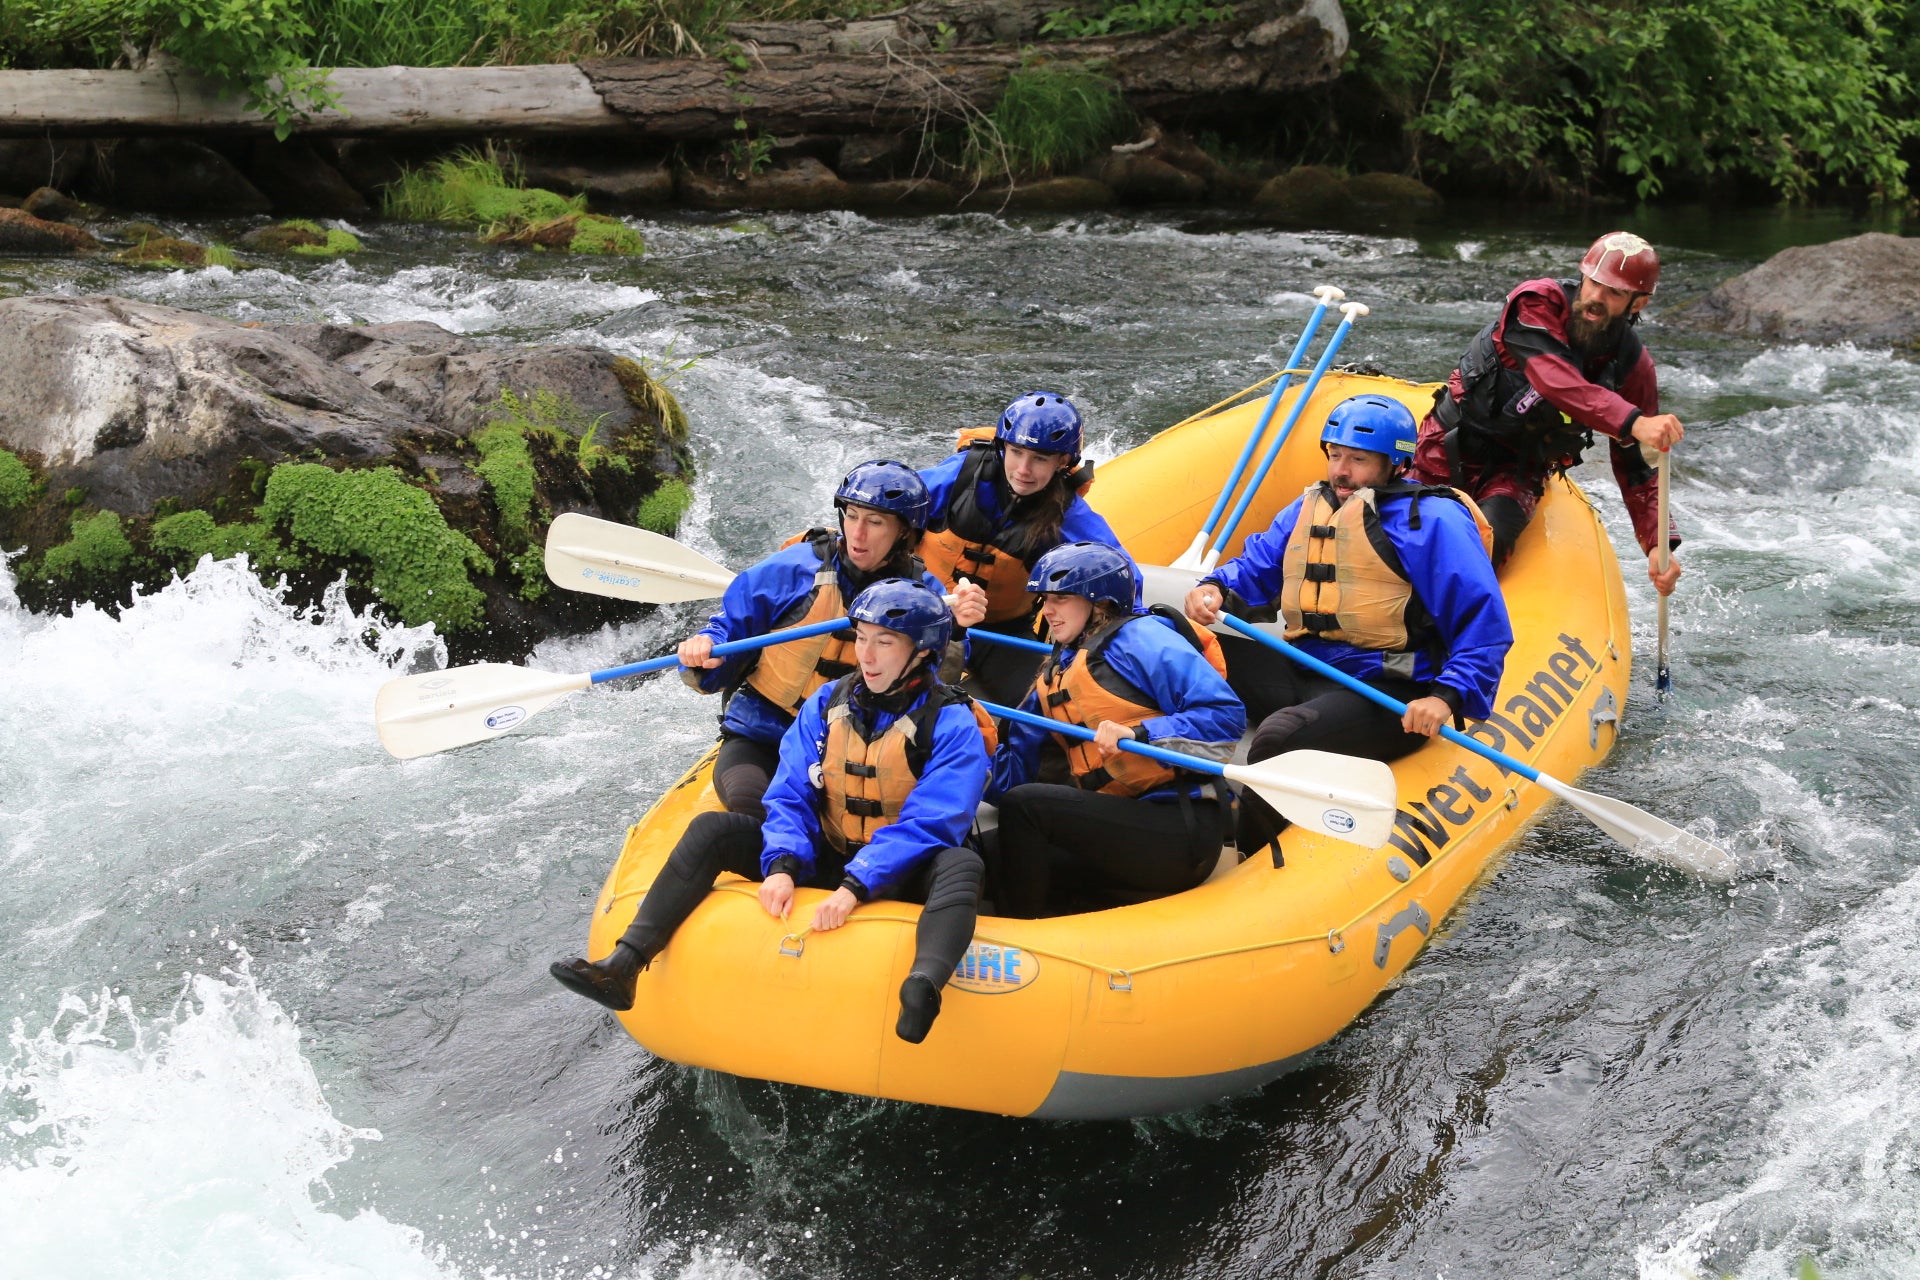 Wet Planet Rafting on the white salmon river